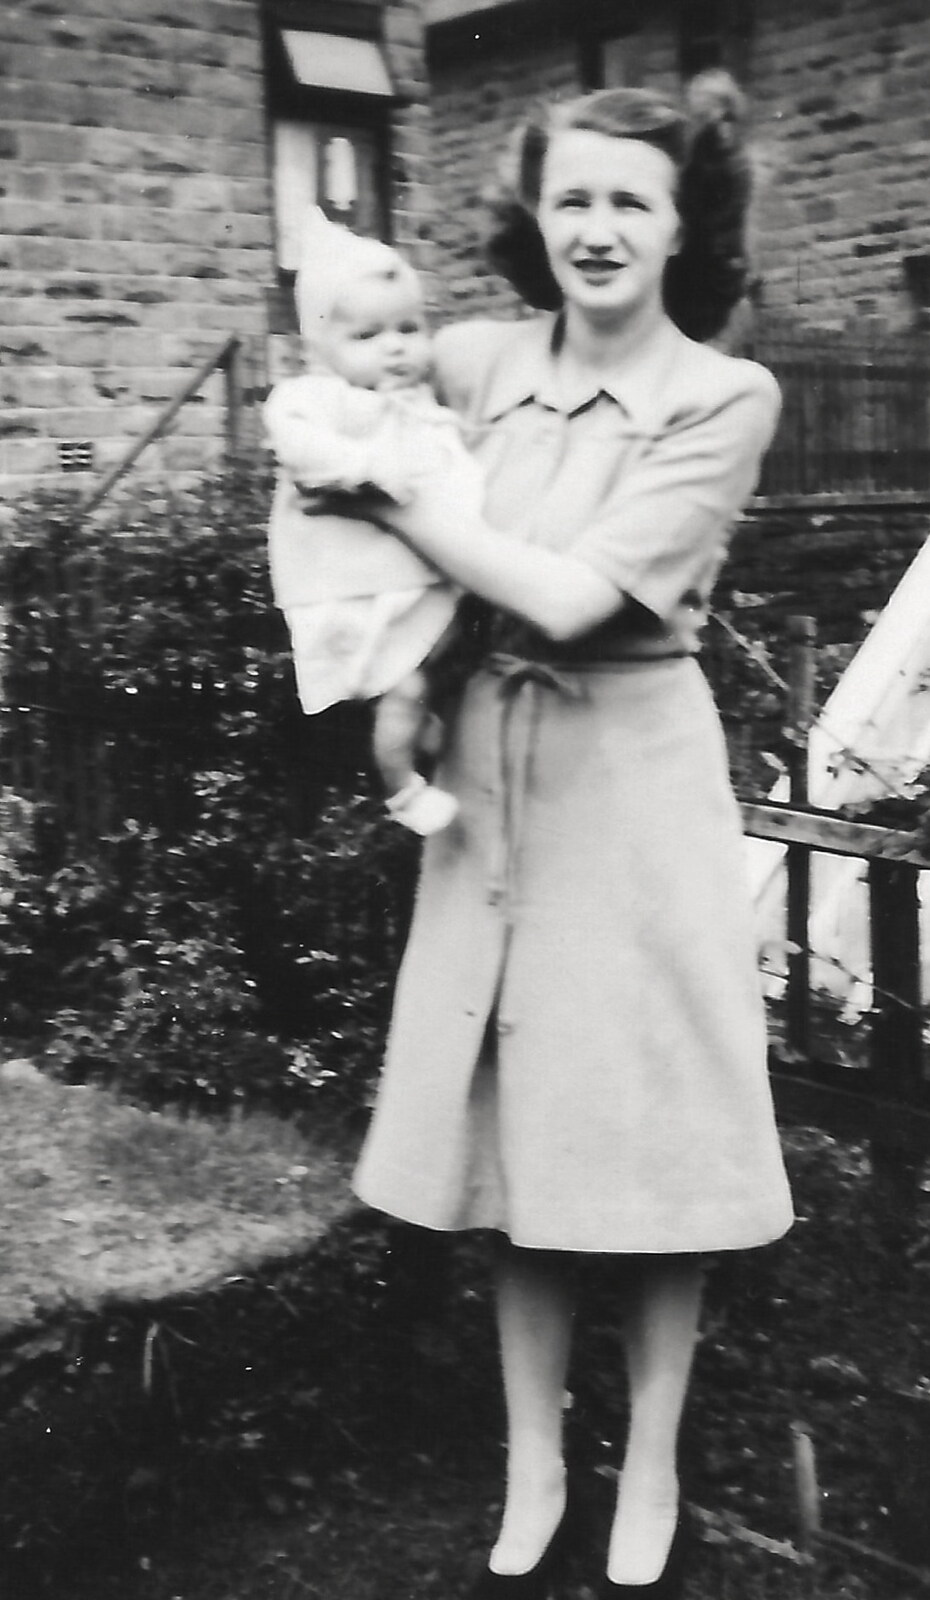 Family History: The 1940s and 1950s - 24th January 2020: Margaret and a baby